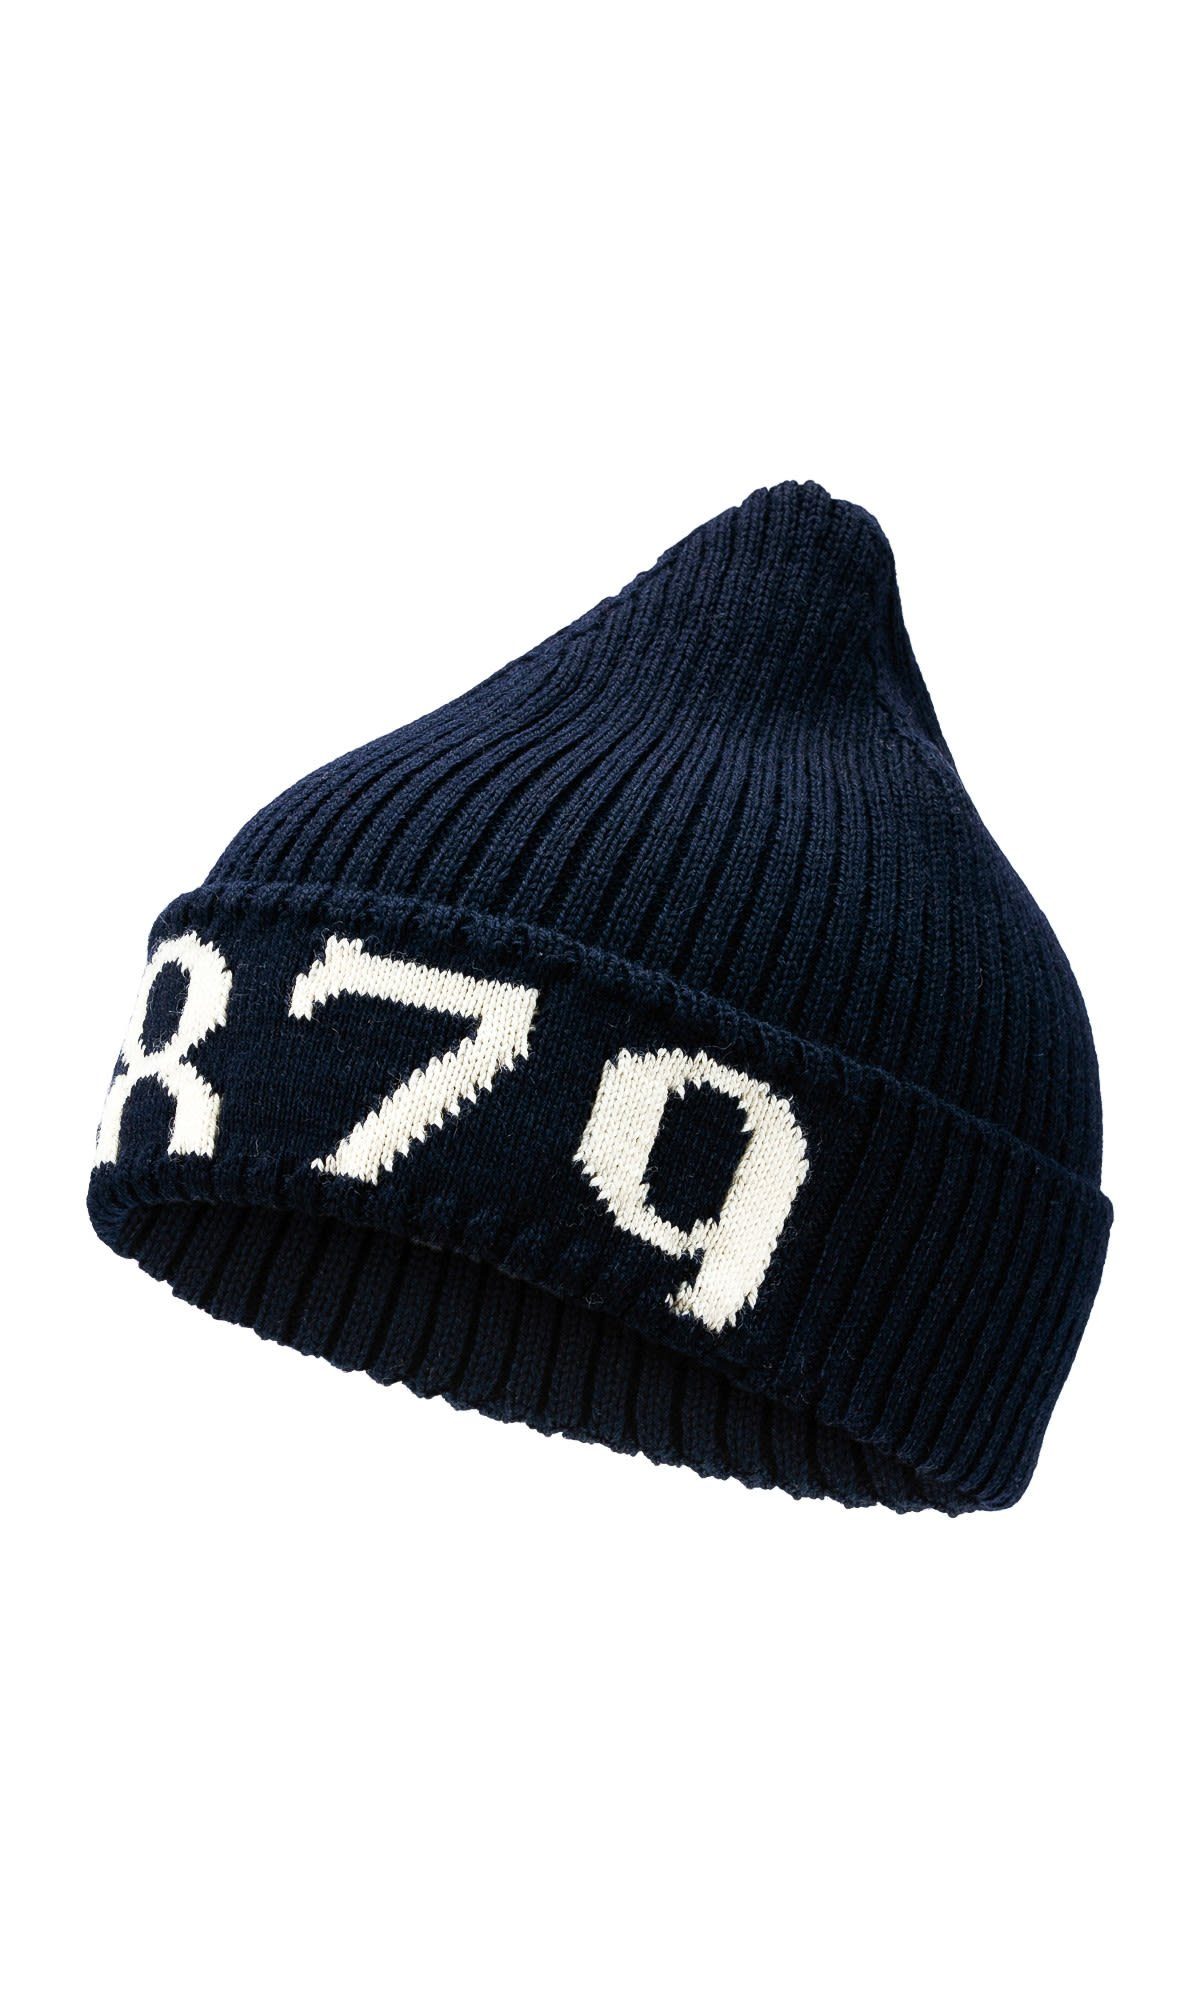 Accessoires Hat of 1879 Beanie Norway Navy Dale Of Offwhite Dale Norway